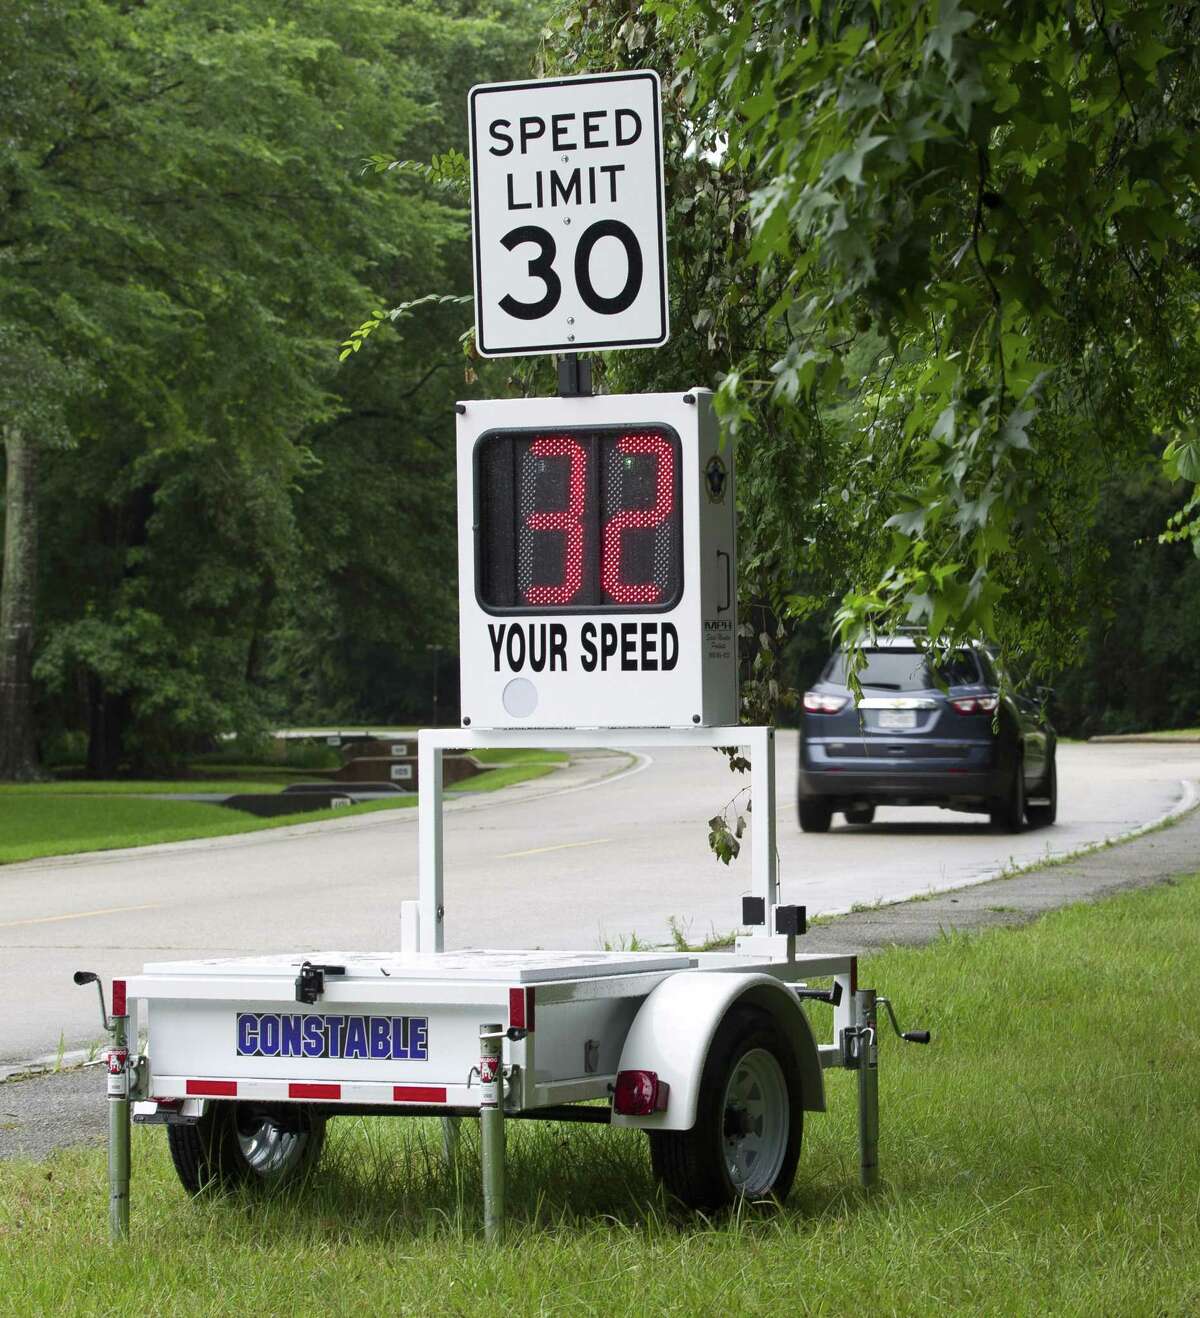 Motorists on Grogan's Point Road pass by a new speed trailer deployed by Montgomery County Precinct 3 Constable's Office in the Grogan's Mill subdivision, Wednesday, June 5, 2019, in The Woodlands. The new trailer, awarded through a nearly $10,000 grant by Texas Governor Greg Abbott's office, shows drivers how fast they are going as a speed deterrent.